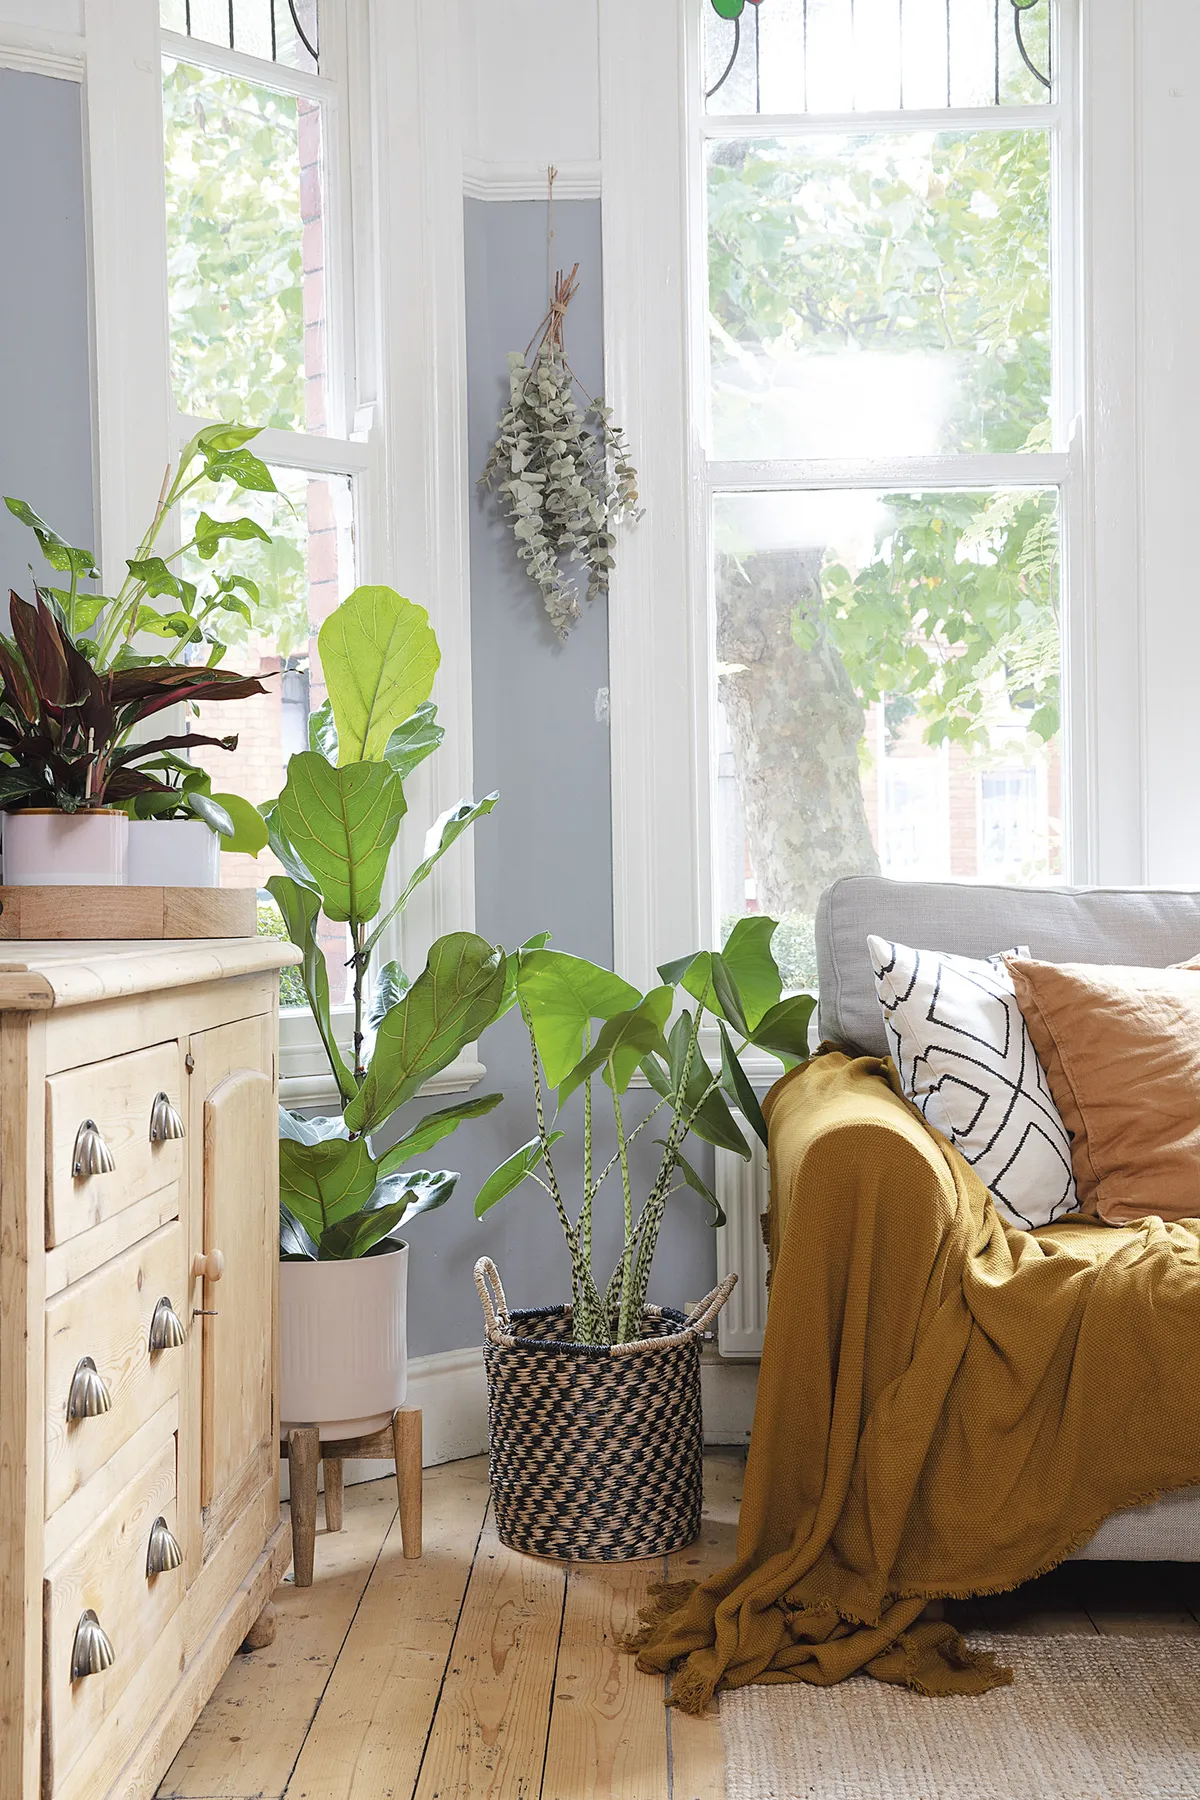 Planters from TK Maxx and HomeSense create a lush display, alongside dried eucalyptus saved from a Christmas garland and hung from the picture rail. ‘Next we plan to add café-style shutters on the lower half of the window,’ says Hollie